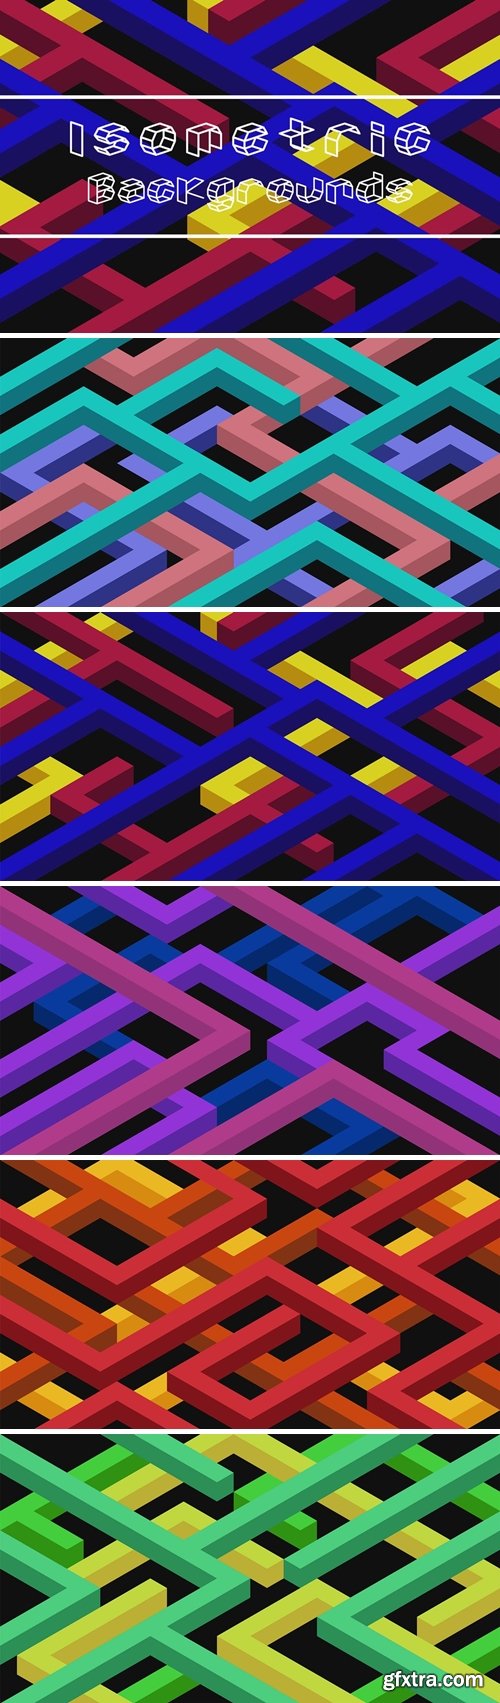 Abstract Isometric Backgrounds